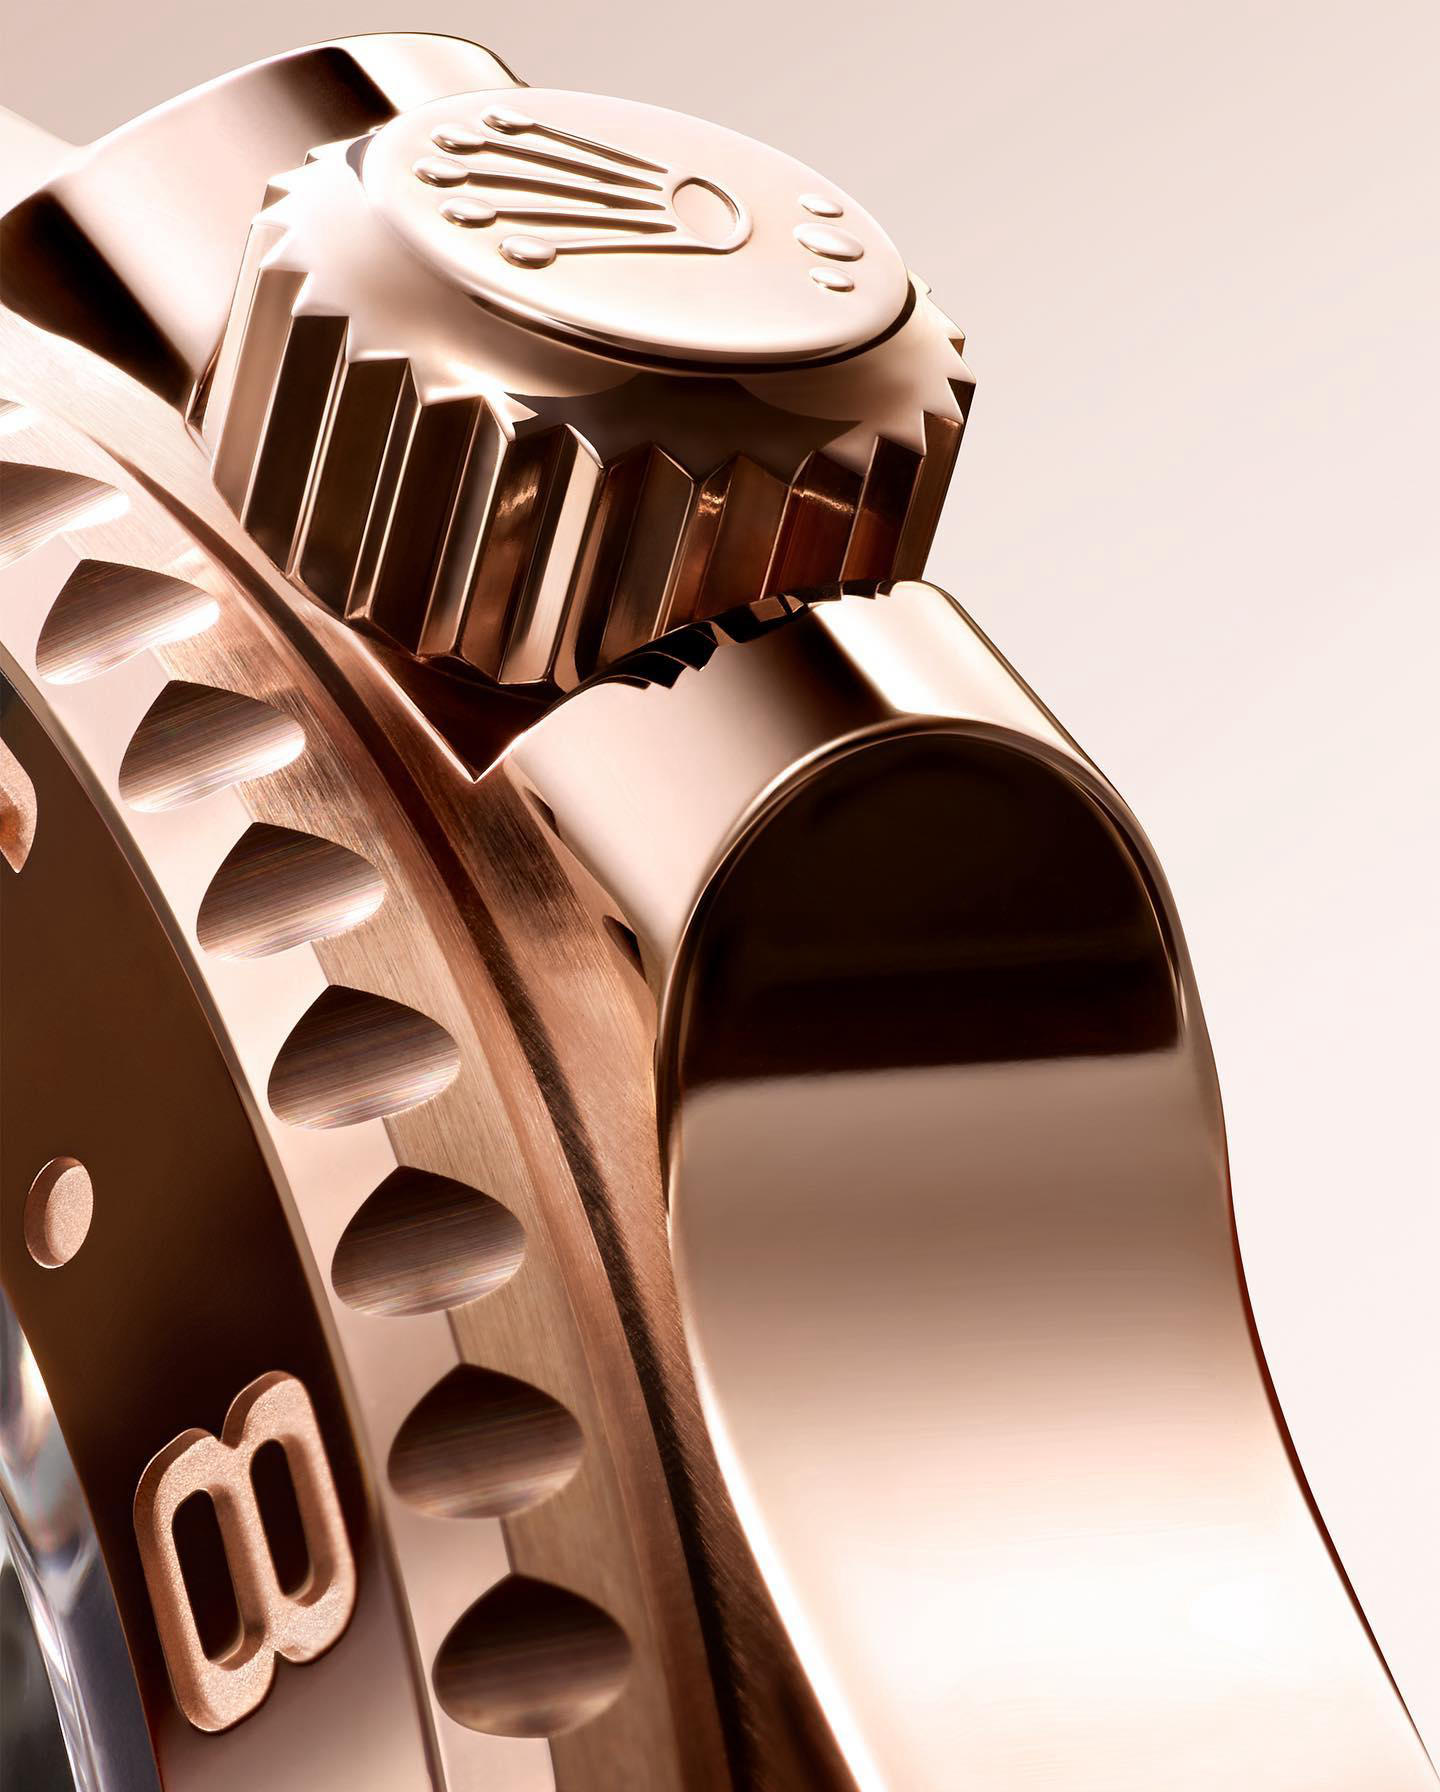 The integral crown guard protecting the GMT-Master II’s Triplock winding crown